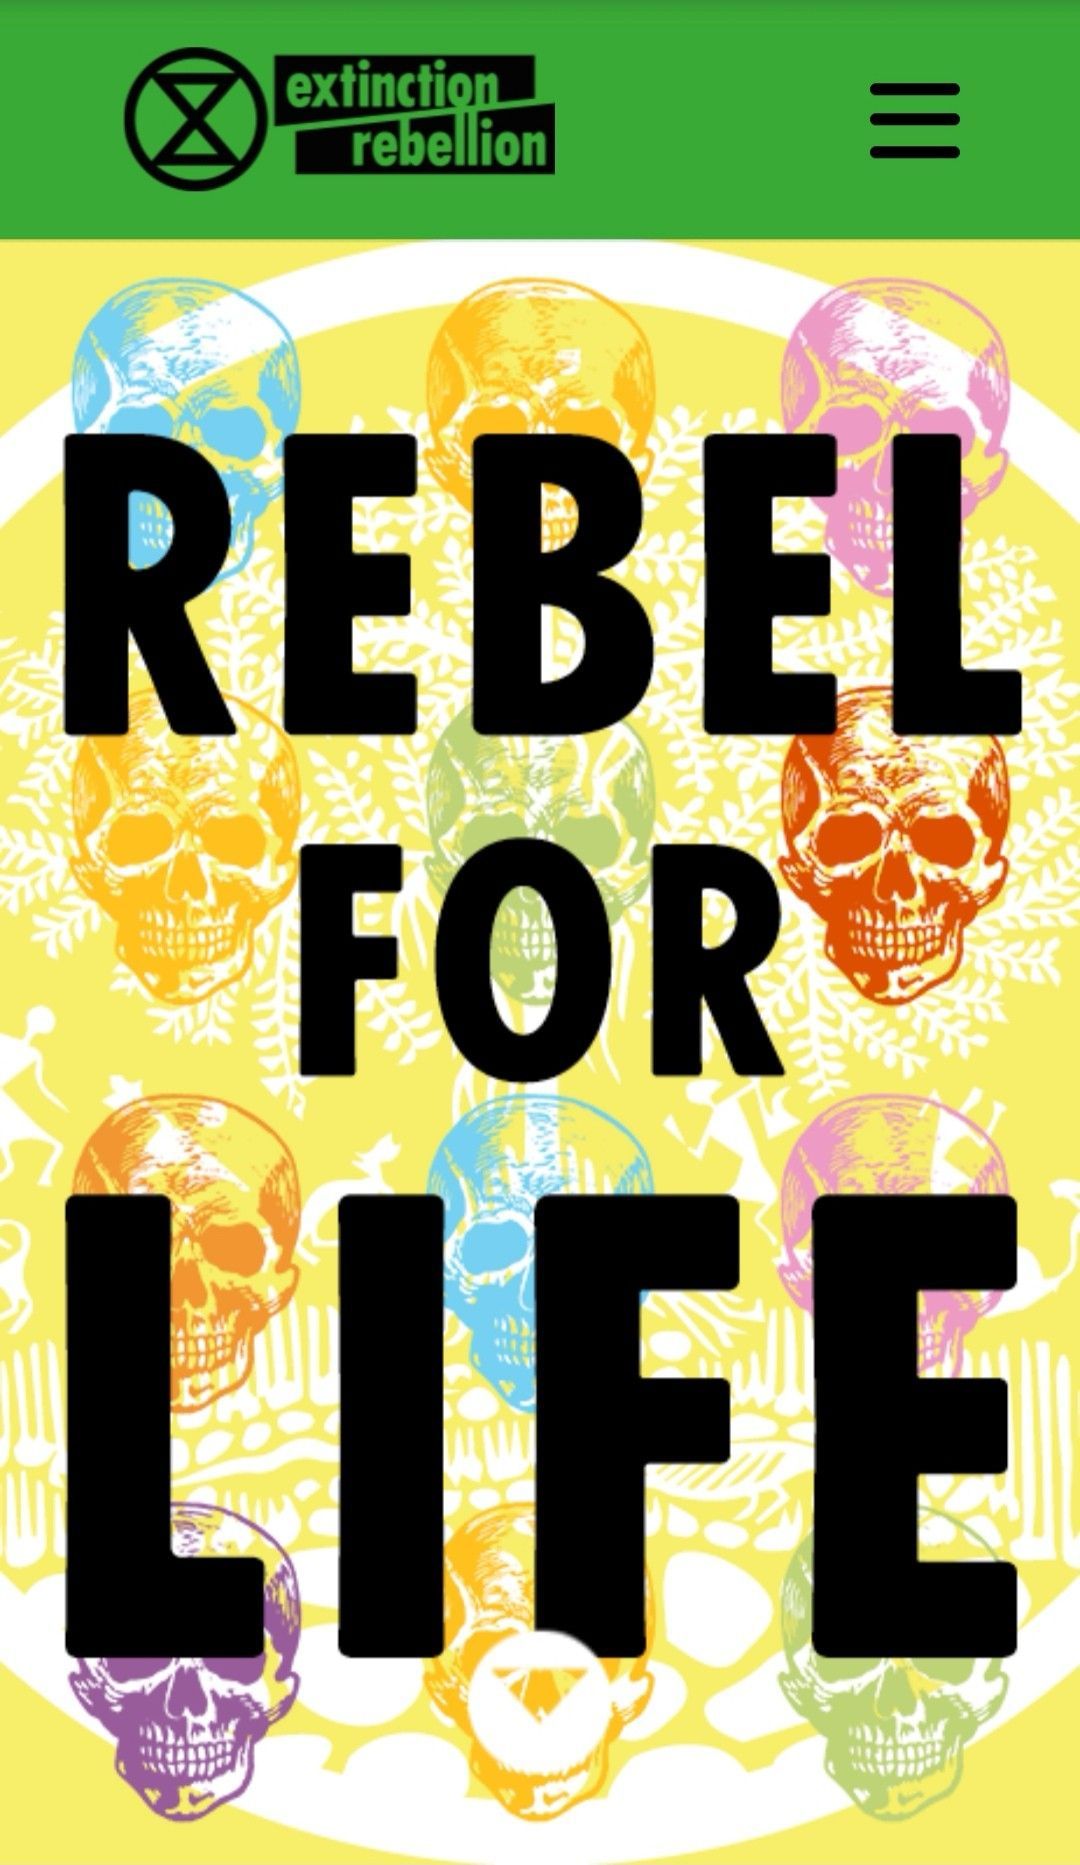 Join the Extinction Rebellion. We are facing an unprecedented global emergency. The government has failed to protect us. To. Extinction, Rebellion, Protest signs